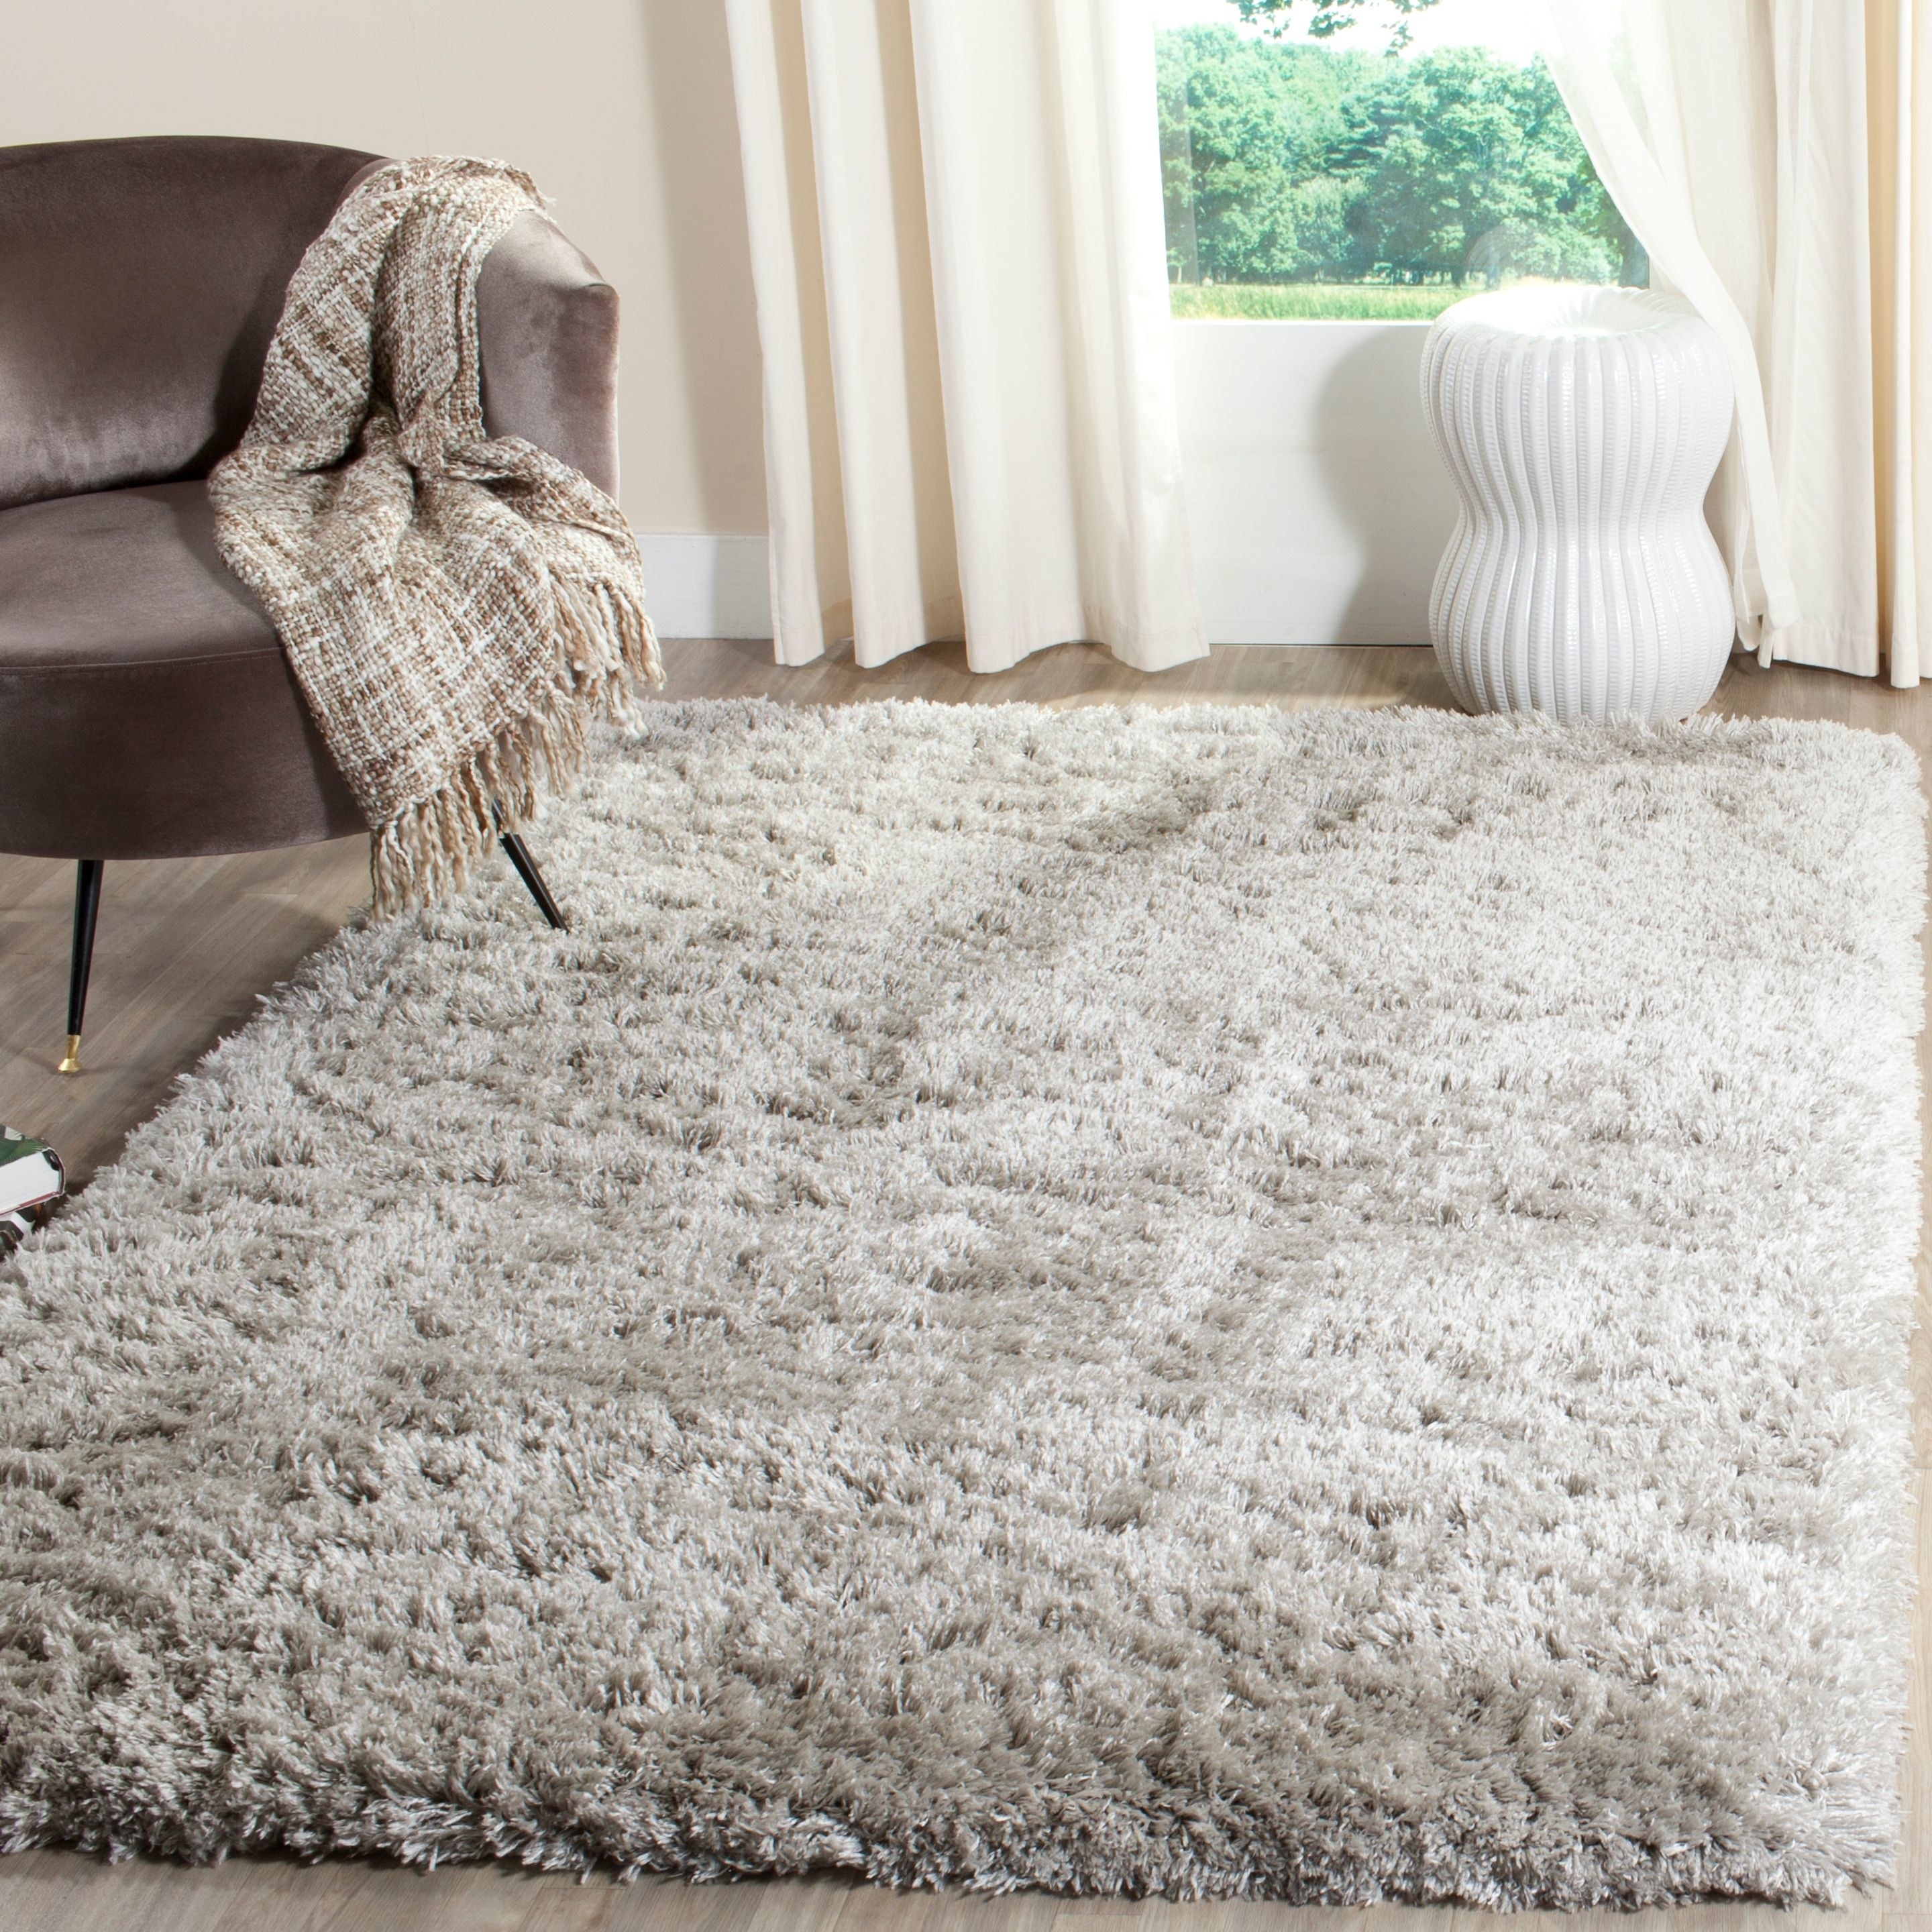 Gray shag rug next to chair